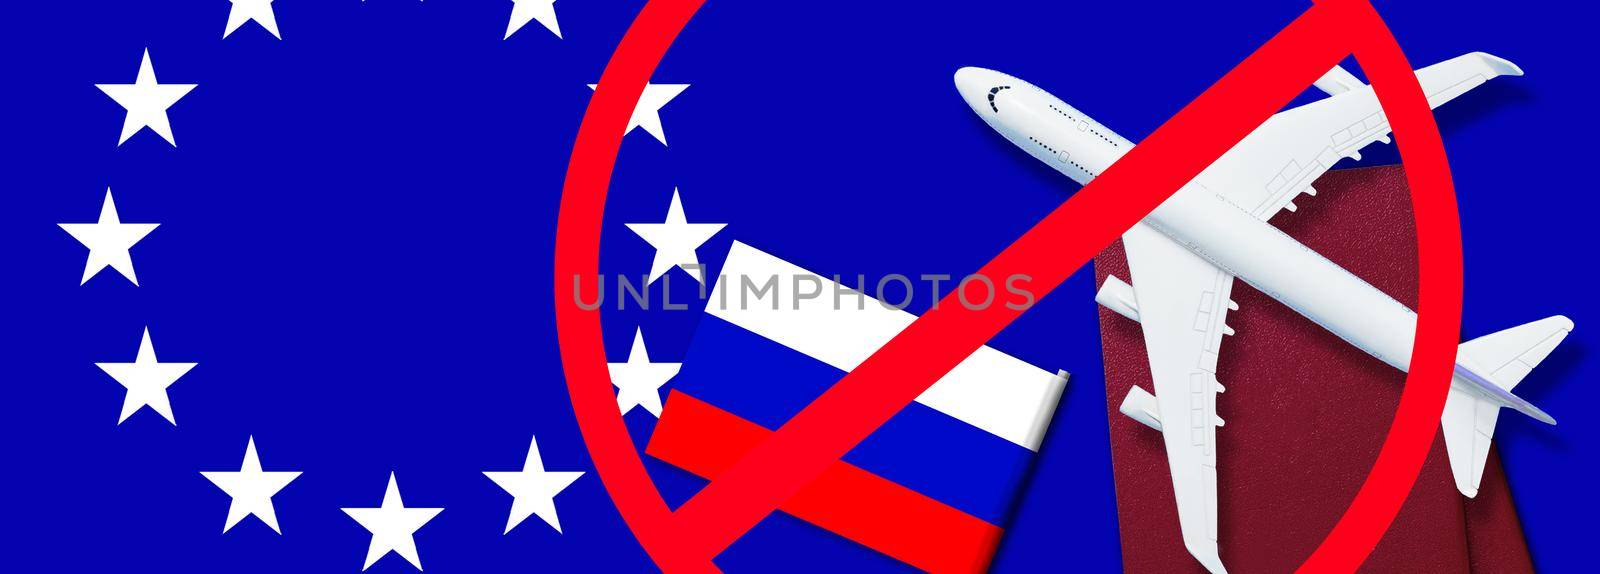 Russian flag, toy plane and barbed wire on blue background, concept of banning aircraft departing from Russia. by Andelov13